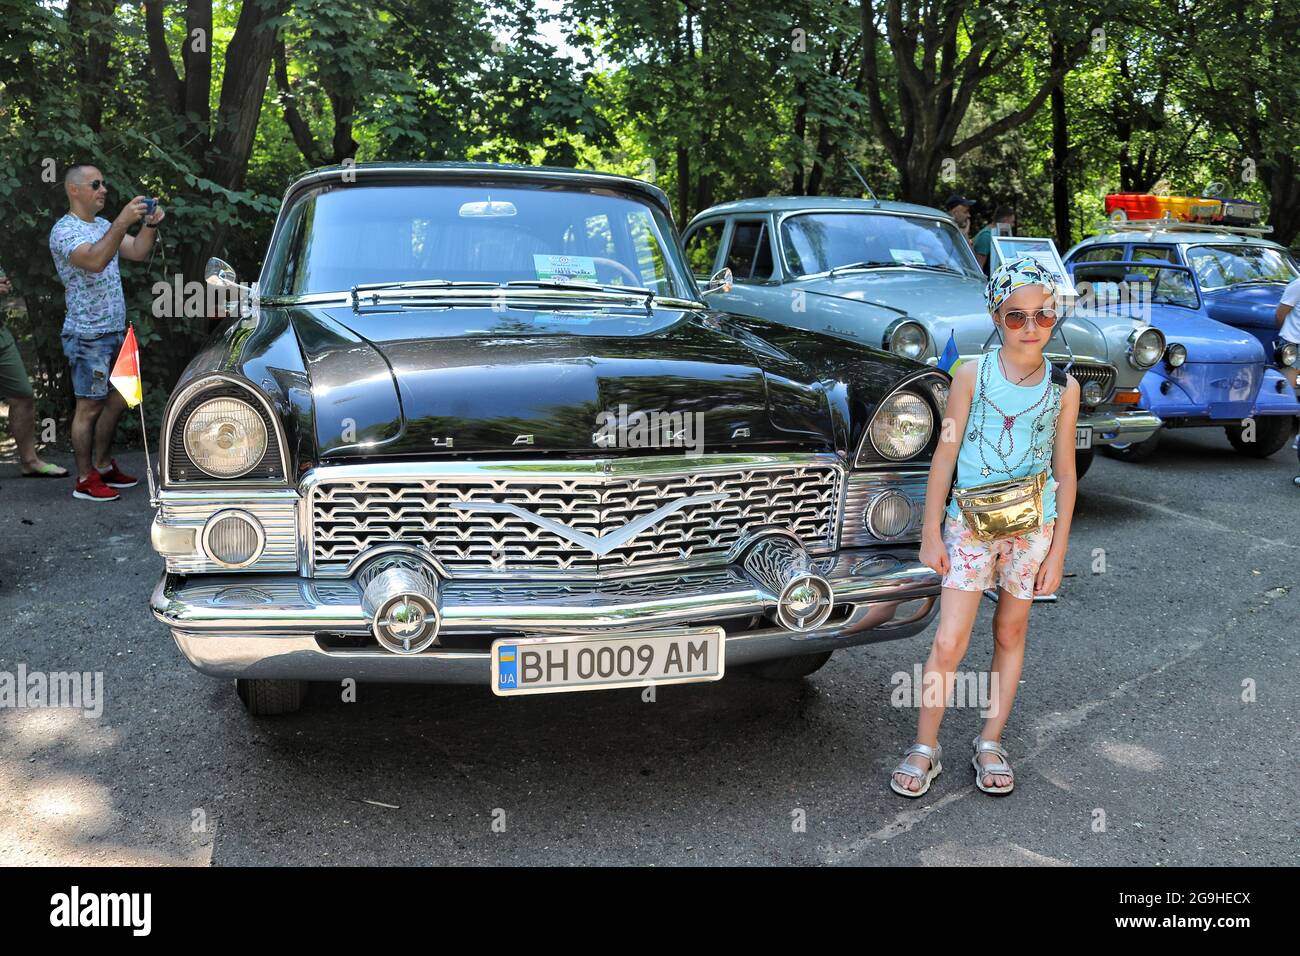 ODESA, UKRAINE - JULY 24, 2021 - A girl poses for a photo next to a black GAZ Chaika during the Old School Weekend 2021 car show in Odesa, southern Uk Stock Photo